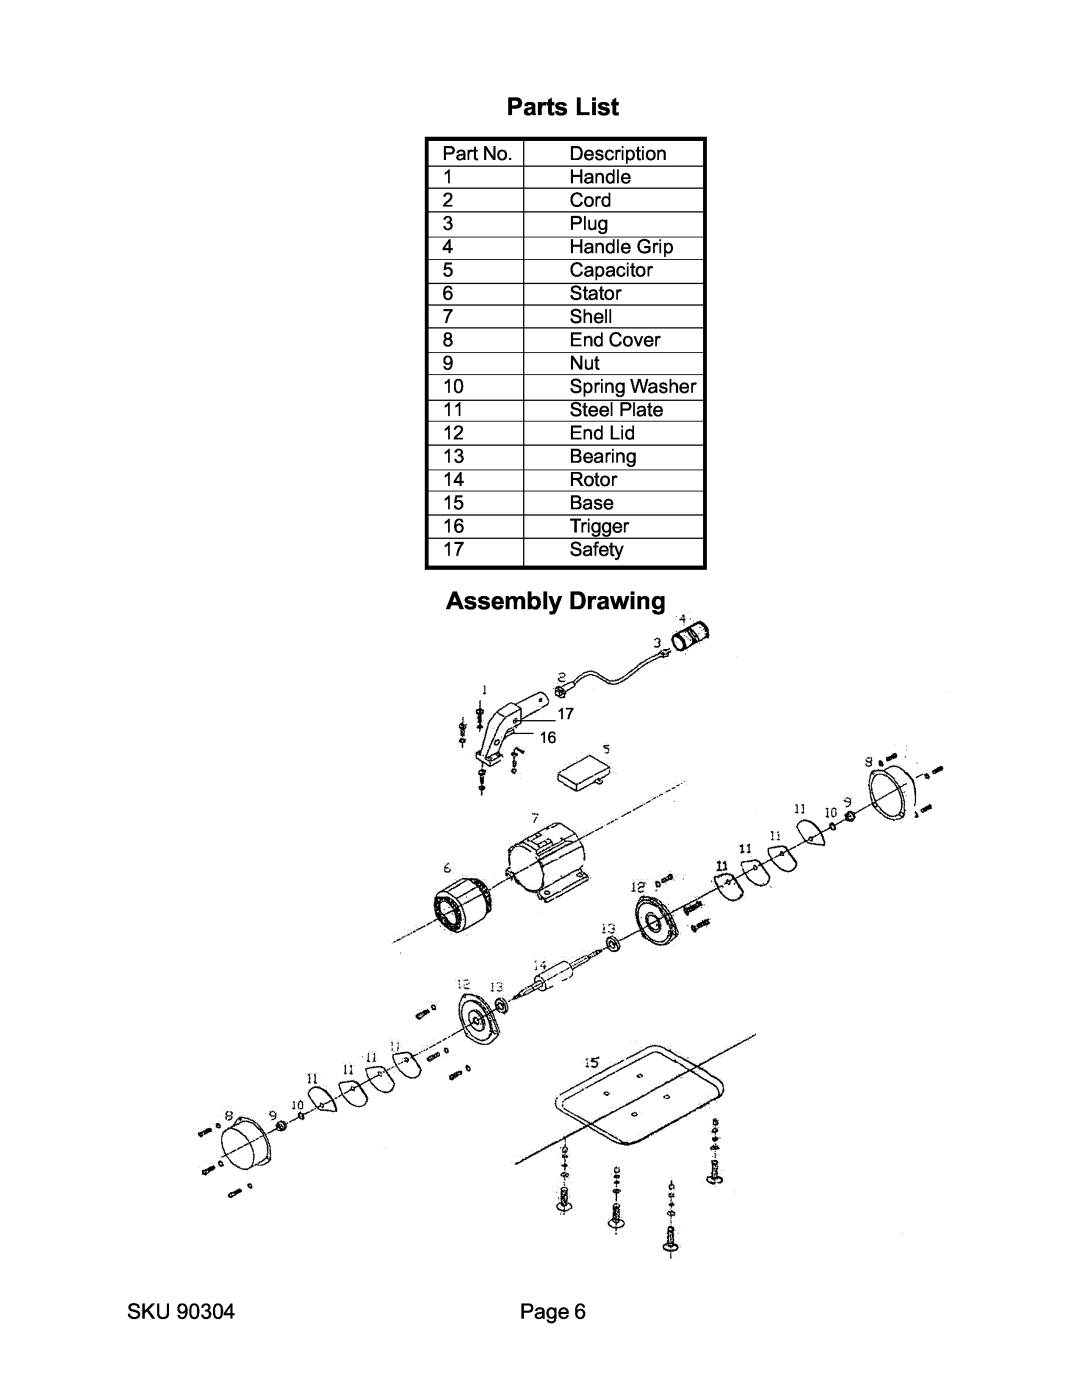 Harbor Freight Tools 90304 operating instructions Parts List, Assembly Drawing 